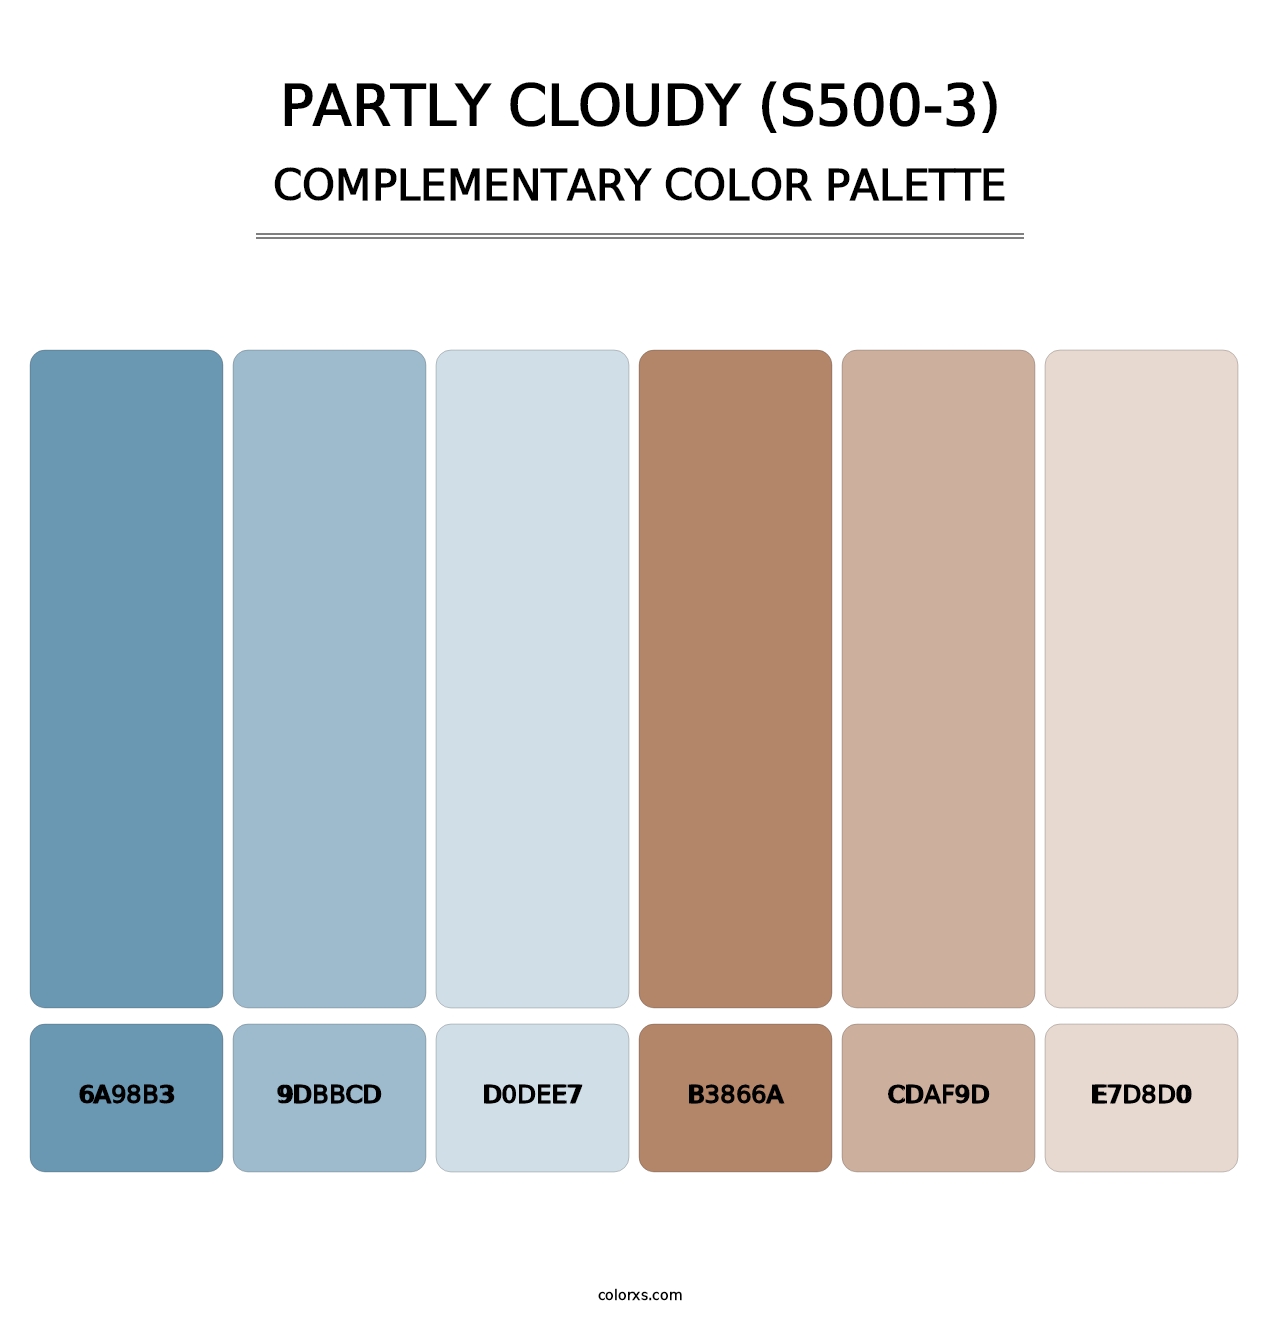 Partly Cloudy (S500-3) - Complementary Color Palette